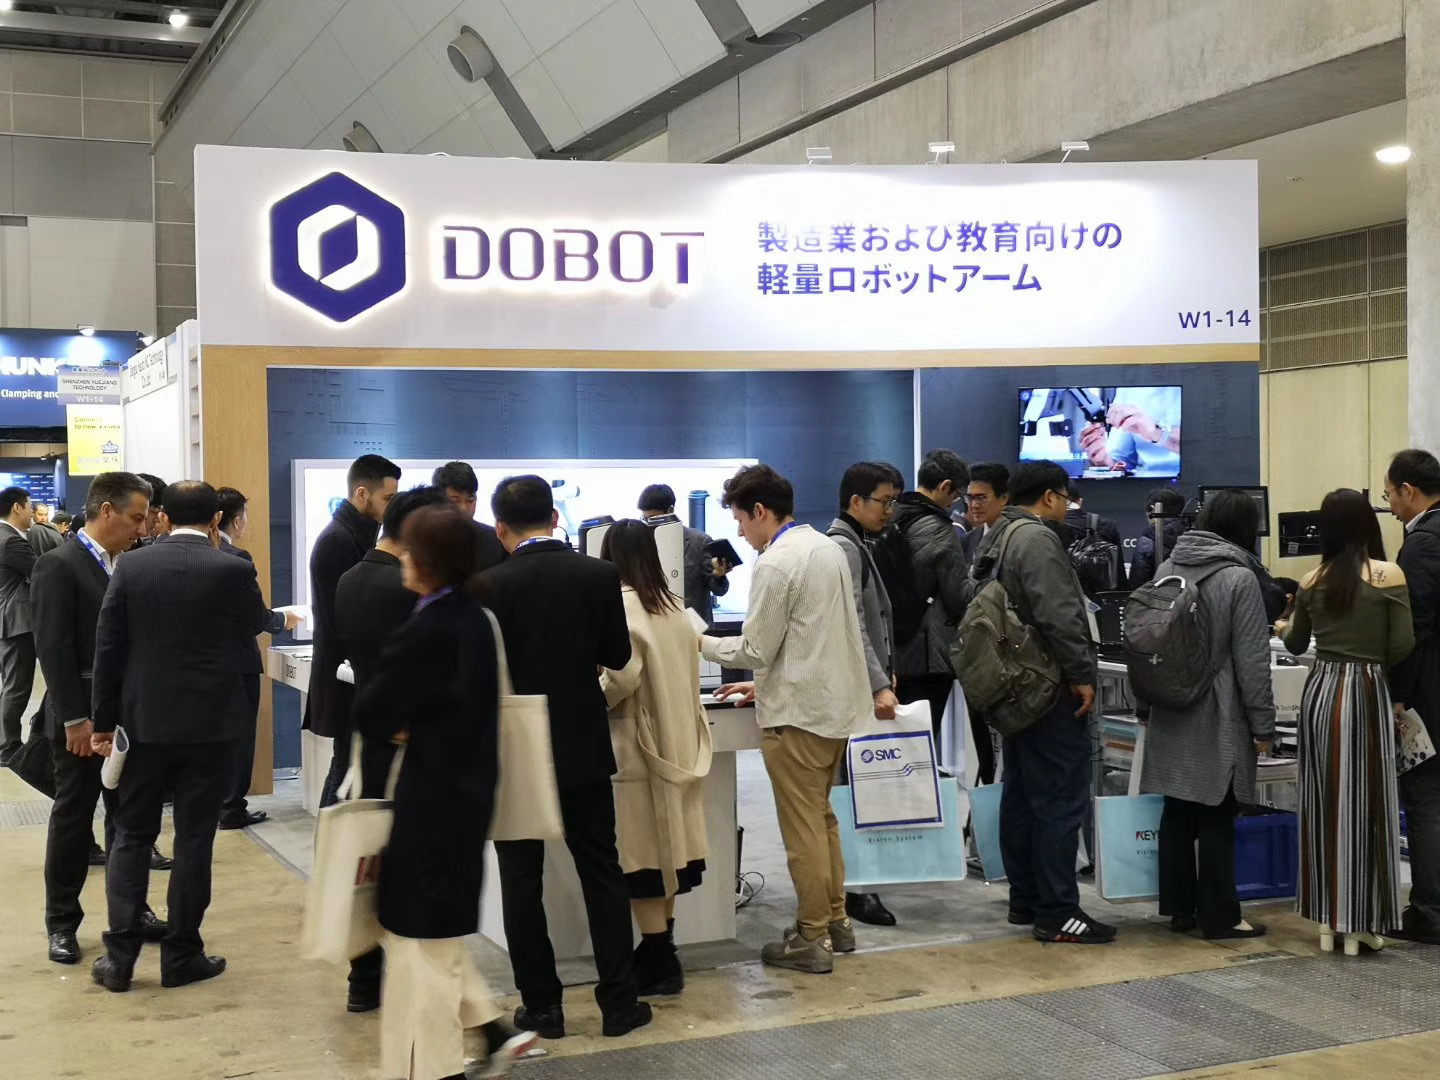 Dobot Displays Its Most Up-to-Date Robotics Solutions for Education and Automation at iREX International Robot Exhibition Tokyo 2019